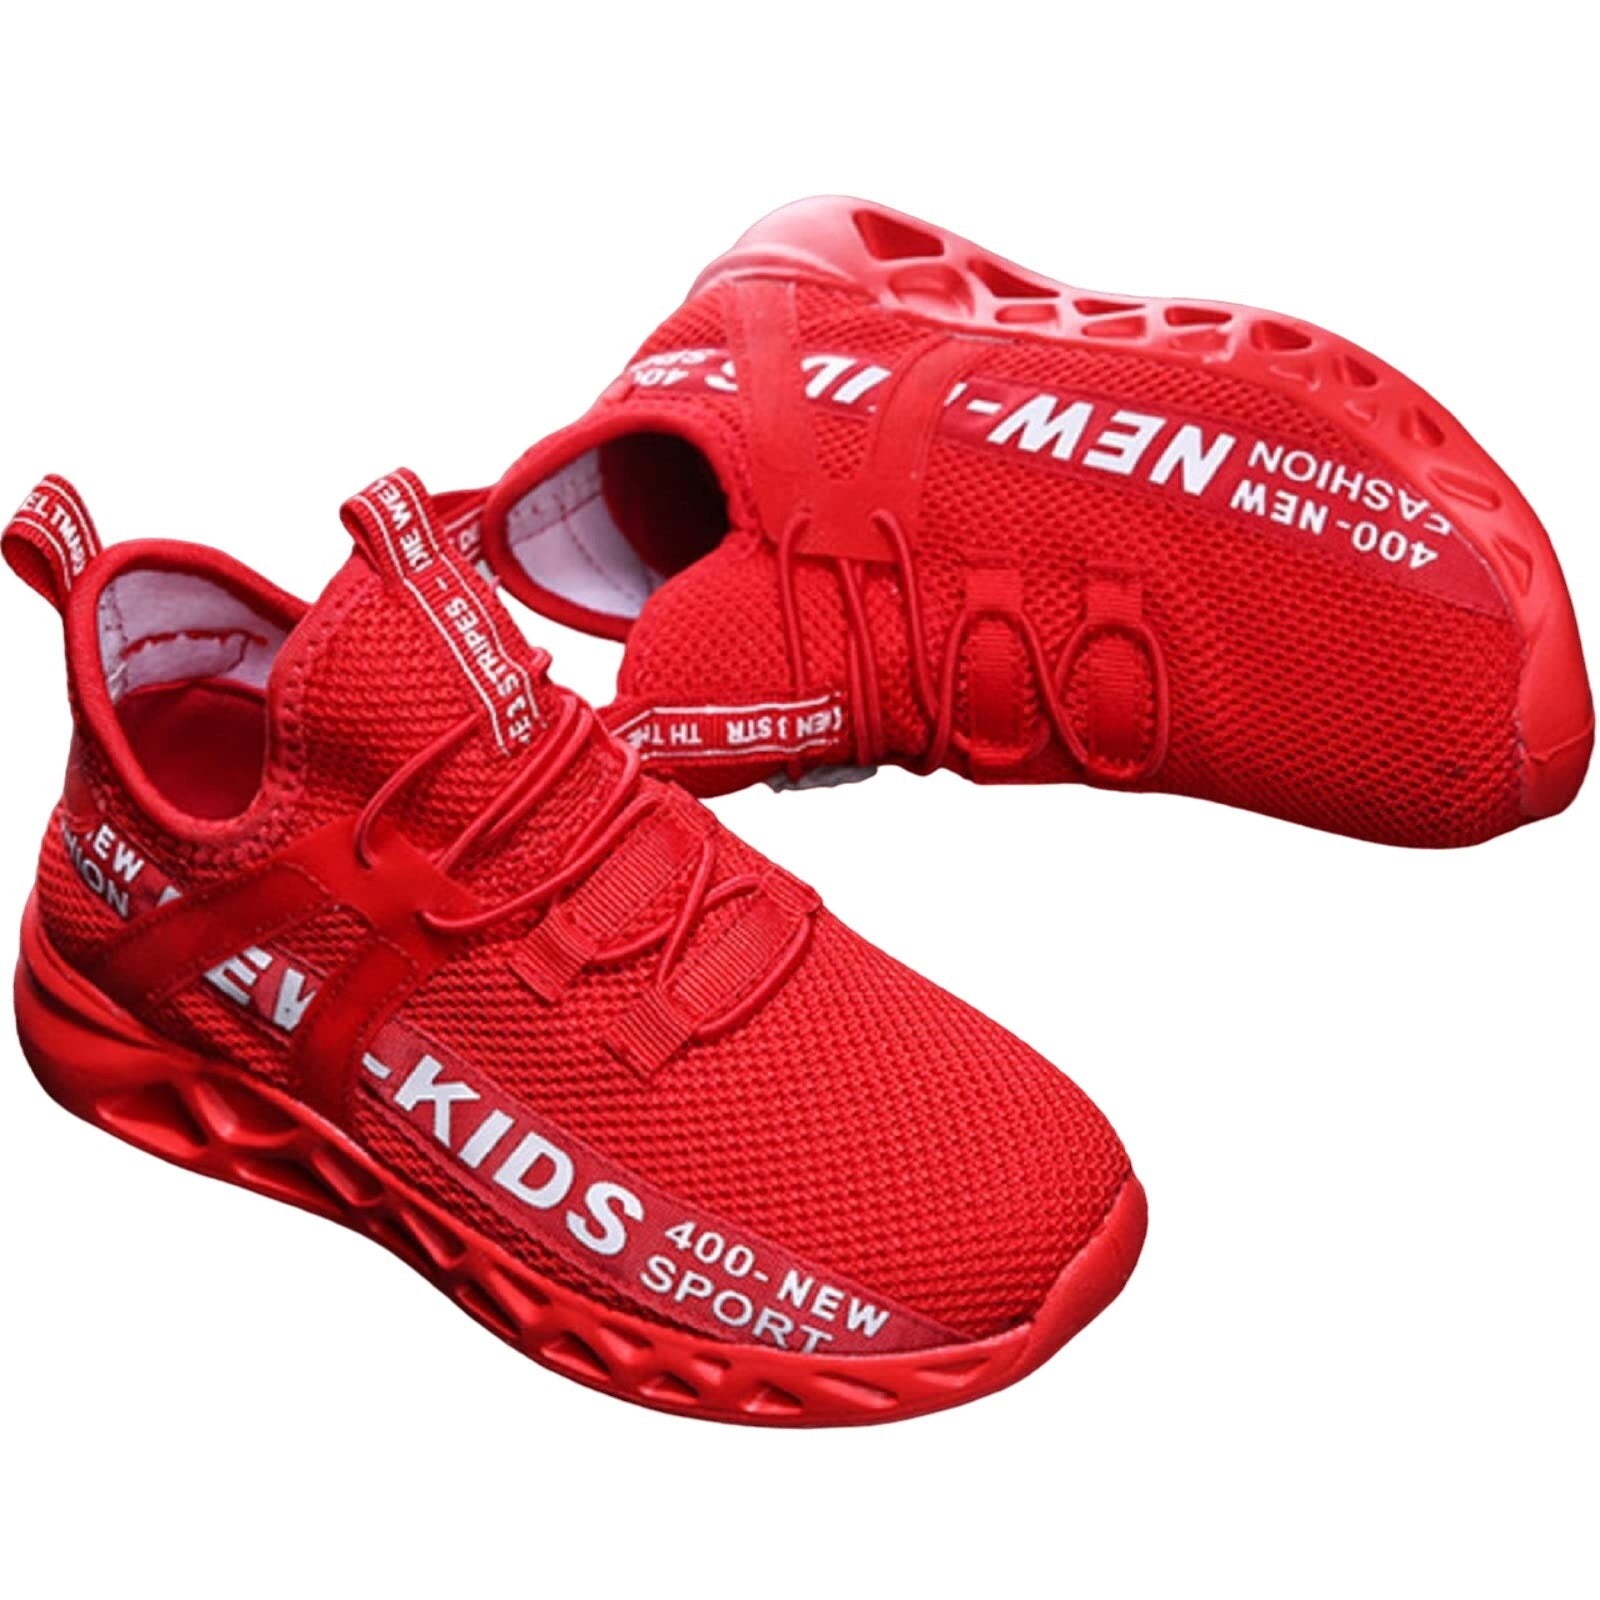 Daclay Red Knit Sneakers for Toddlers - Size 7.5 Affordable Mesh Athletic Shoes